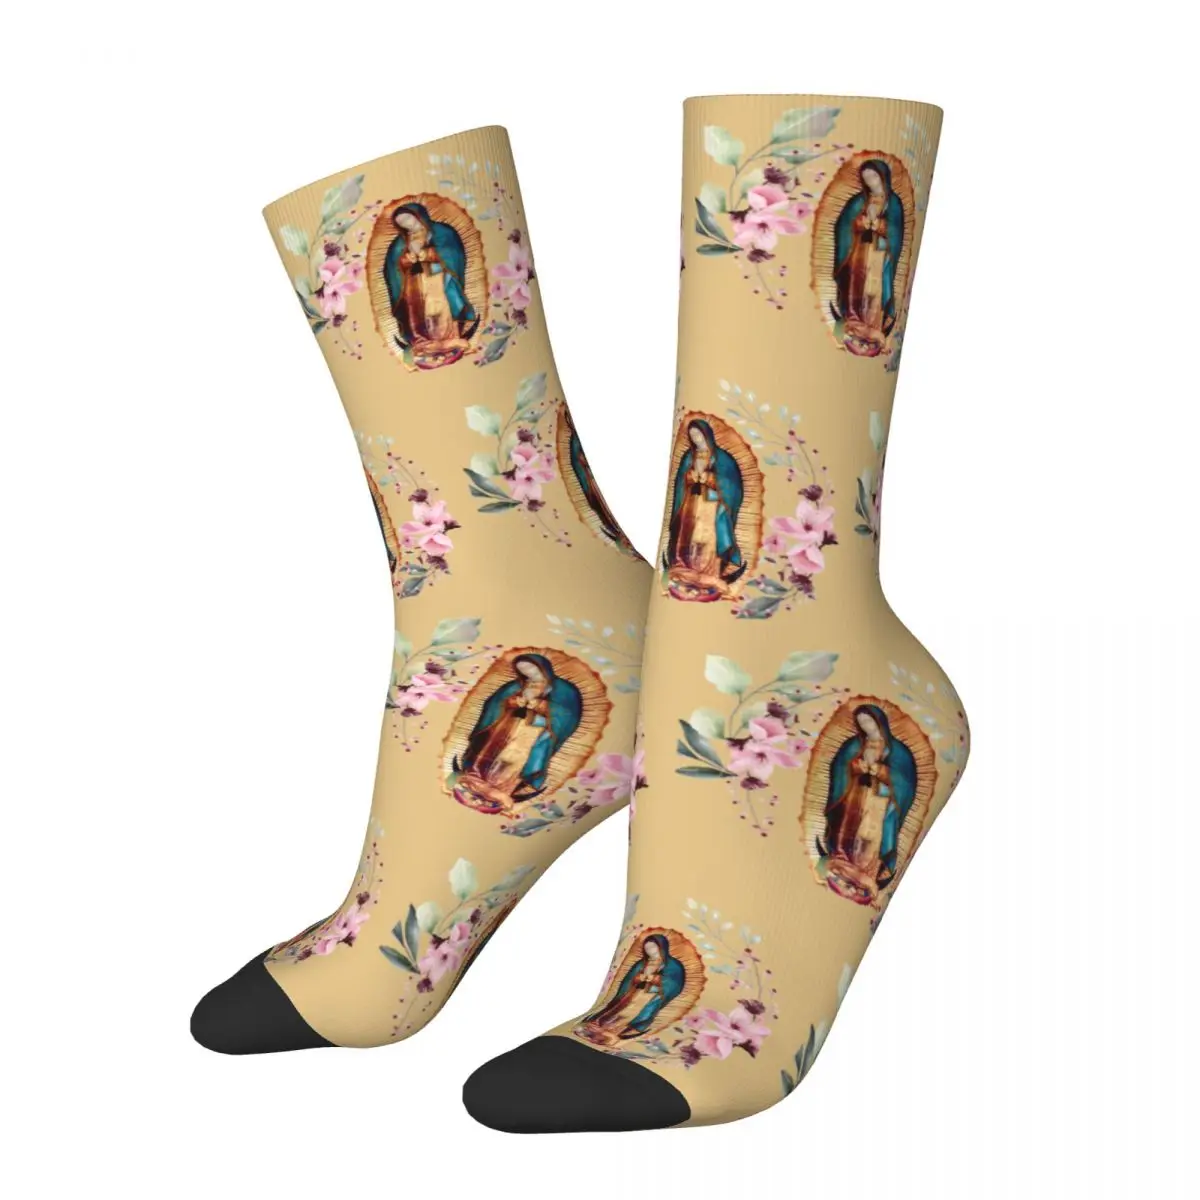 

Harajuku Women Men Socks Our Lady Of Guadalupe Virgin Mary Accessories Cute High Quality Stockings All Season